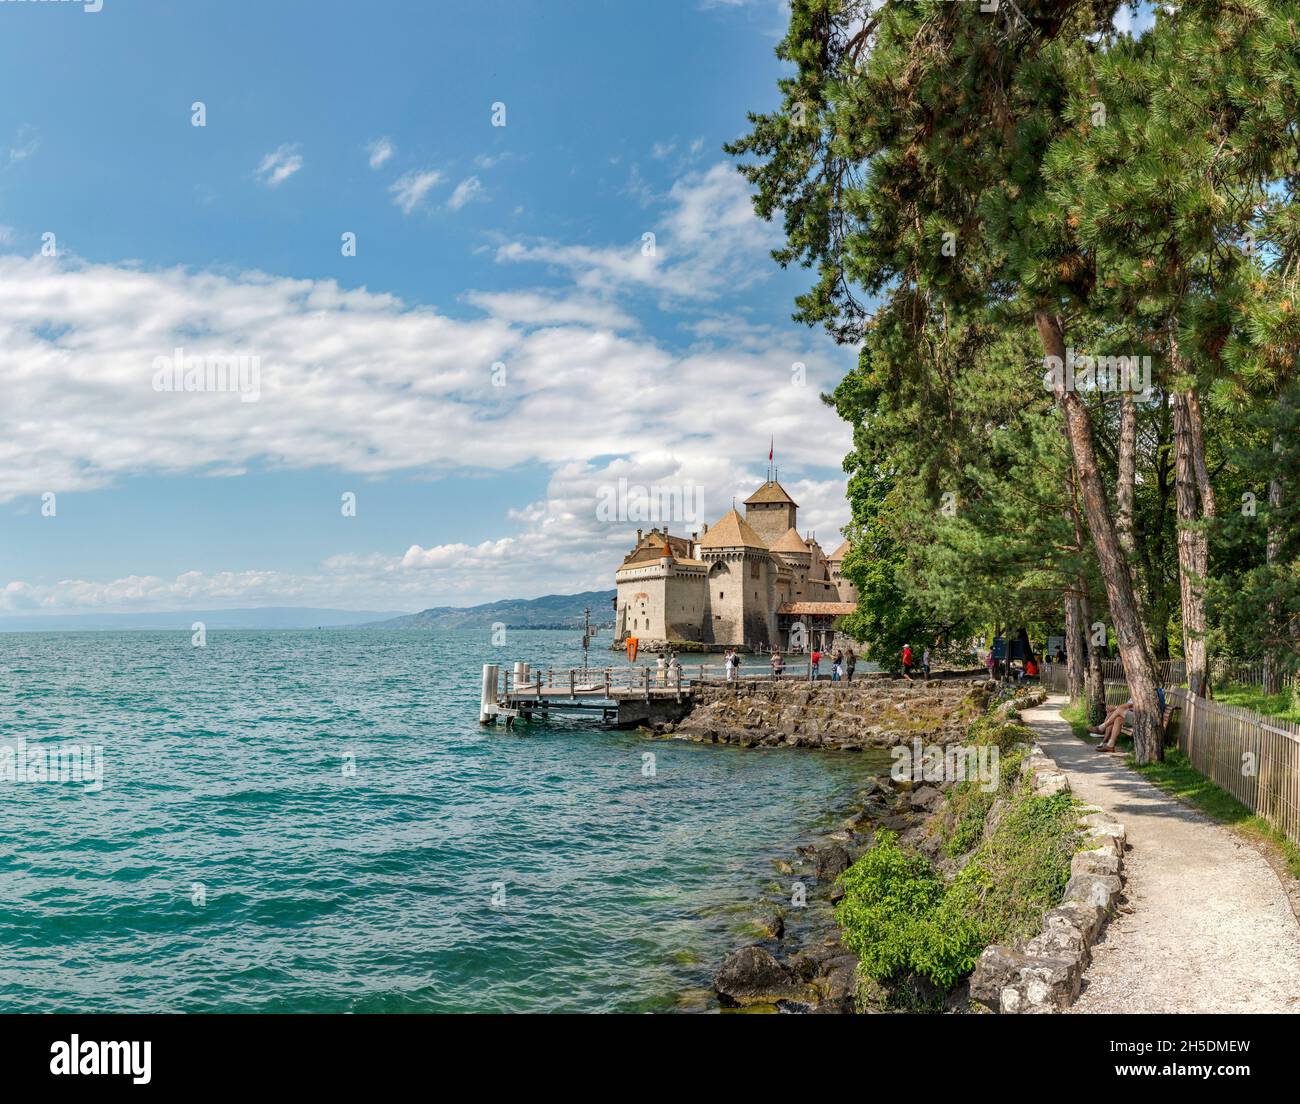 Chateau Chillon at Lac Léman *** Local Caption ***  Veytaux, Switzerland, castle, water, trees, summer, mountains, lake, Stock Photo